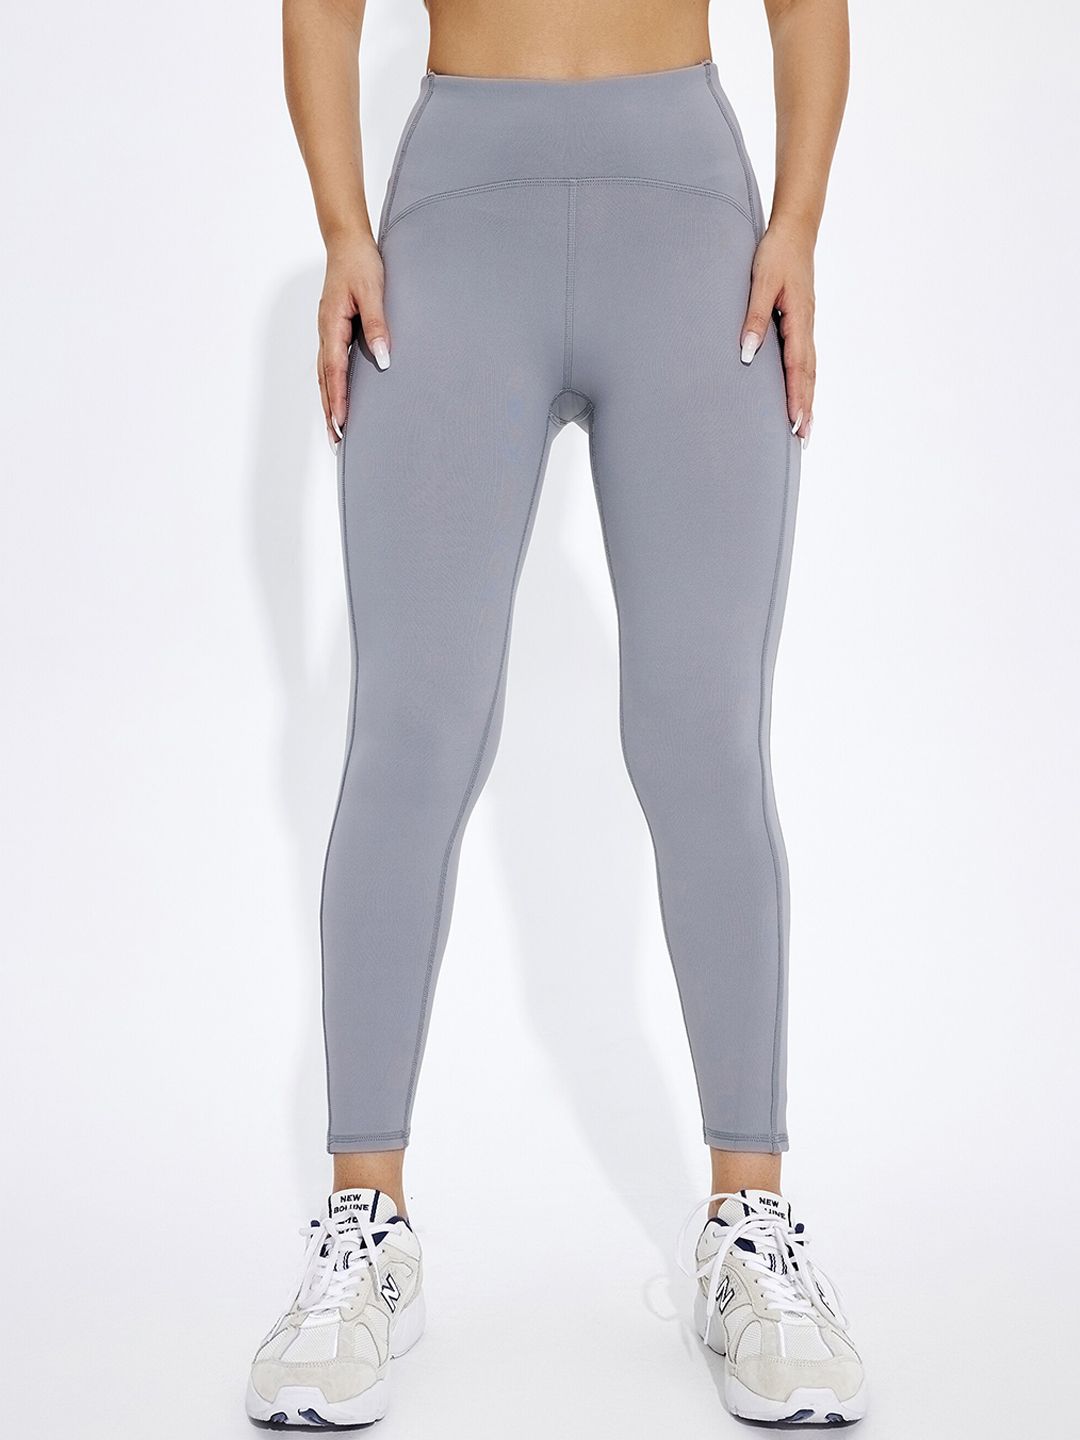 URBANIC Women Grey Solid Tights Price in India